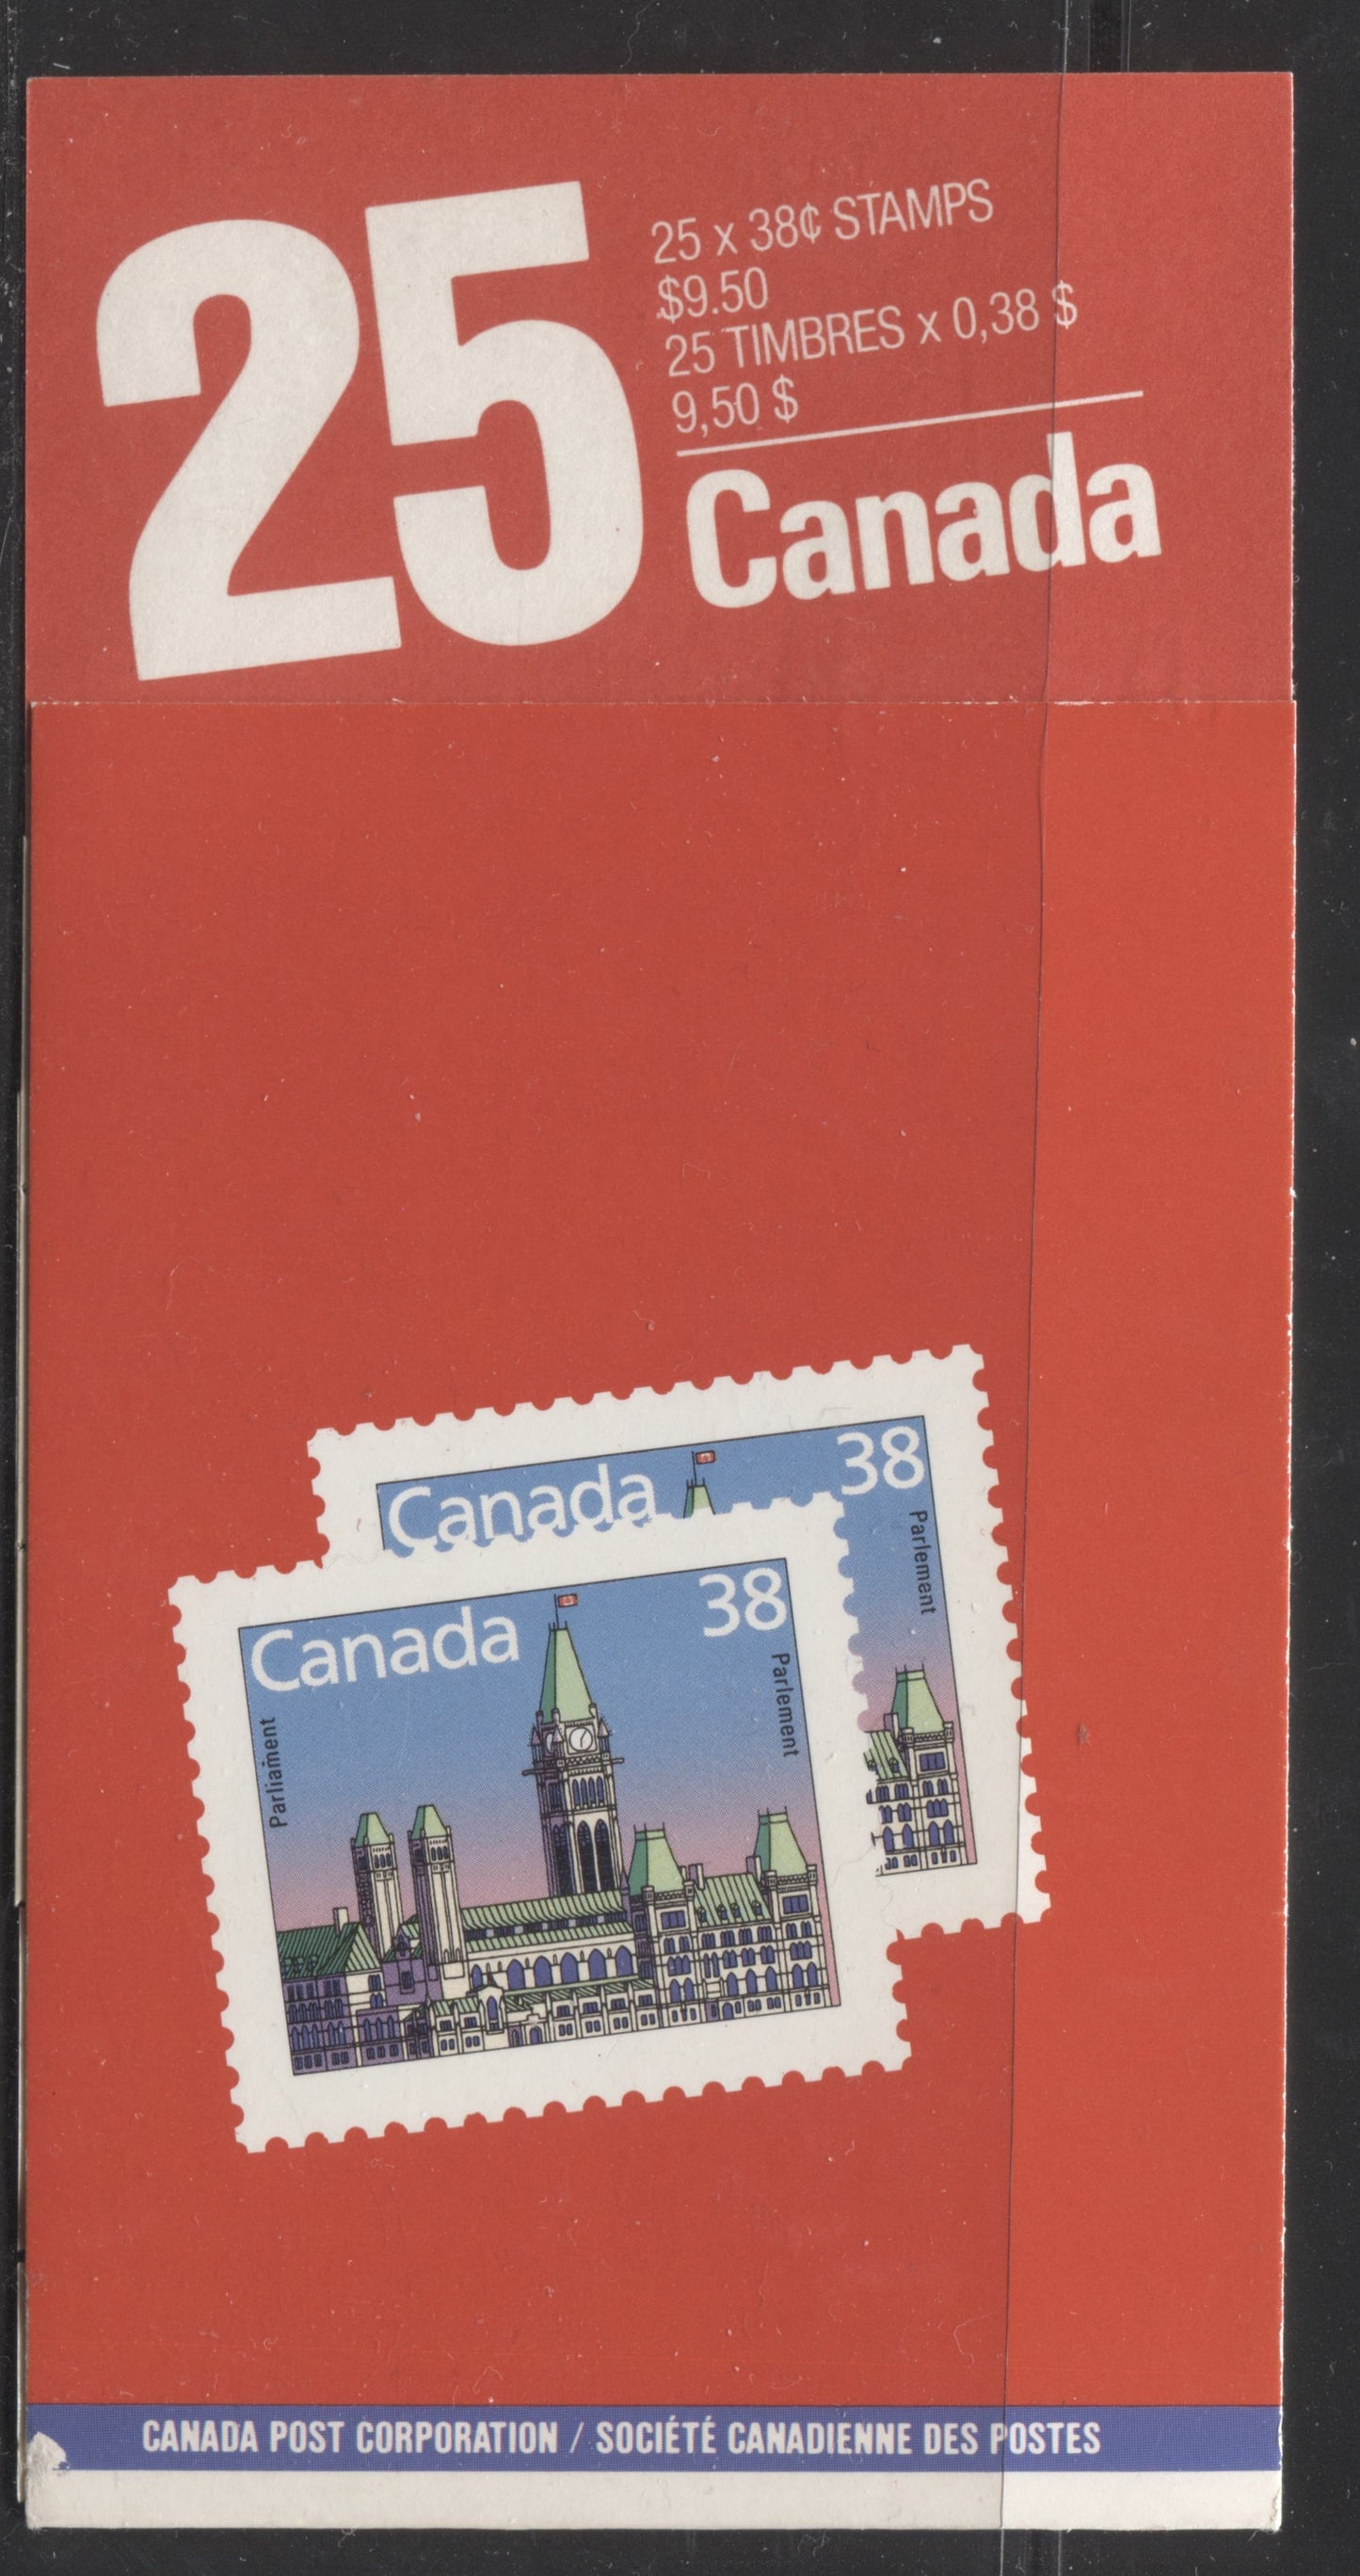 Canada #BK103a-c 1988-1996 Mammal and Architecture Issue, Complete $9.50 Booklet, Coated Slater Paper, Dead Paper, 4 mm GT-4 Tagging Brixton Chrome 